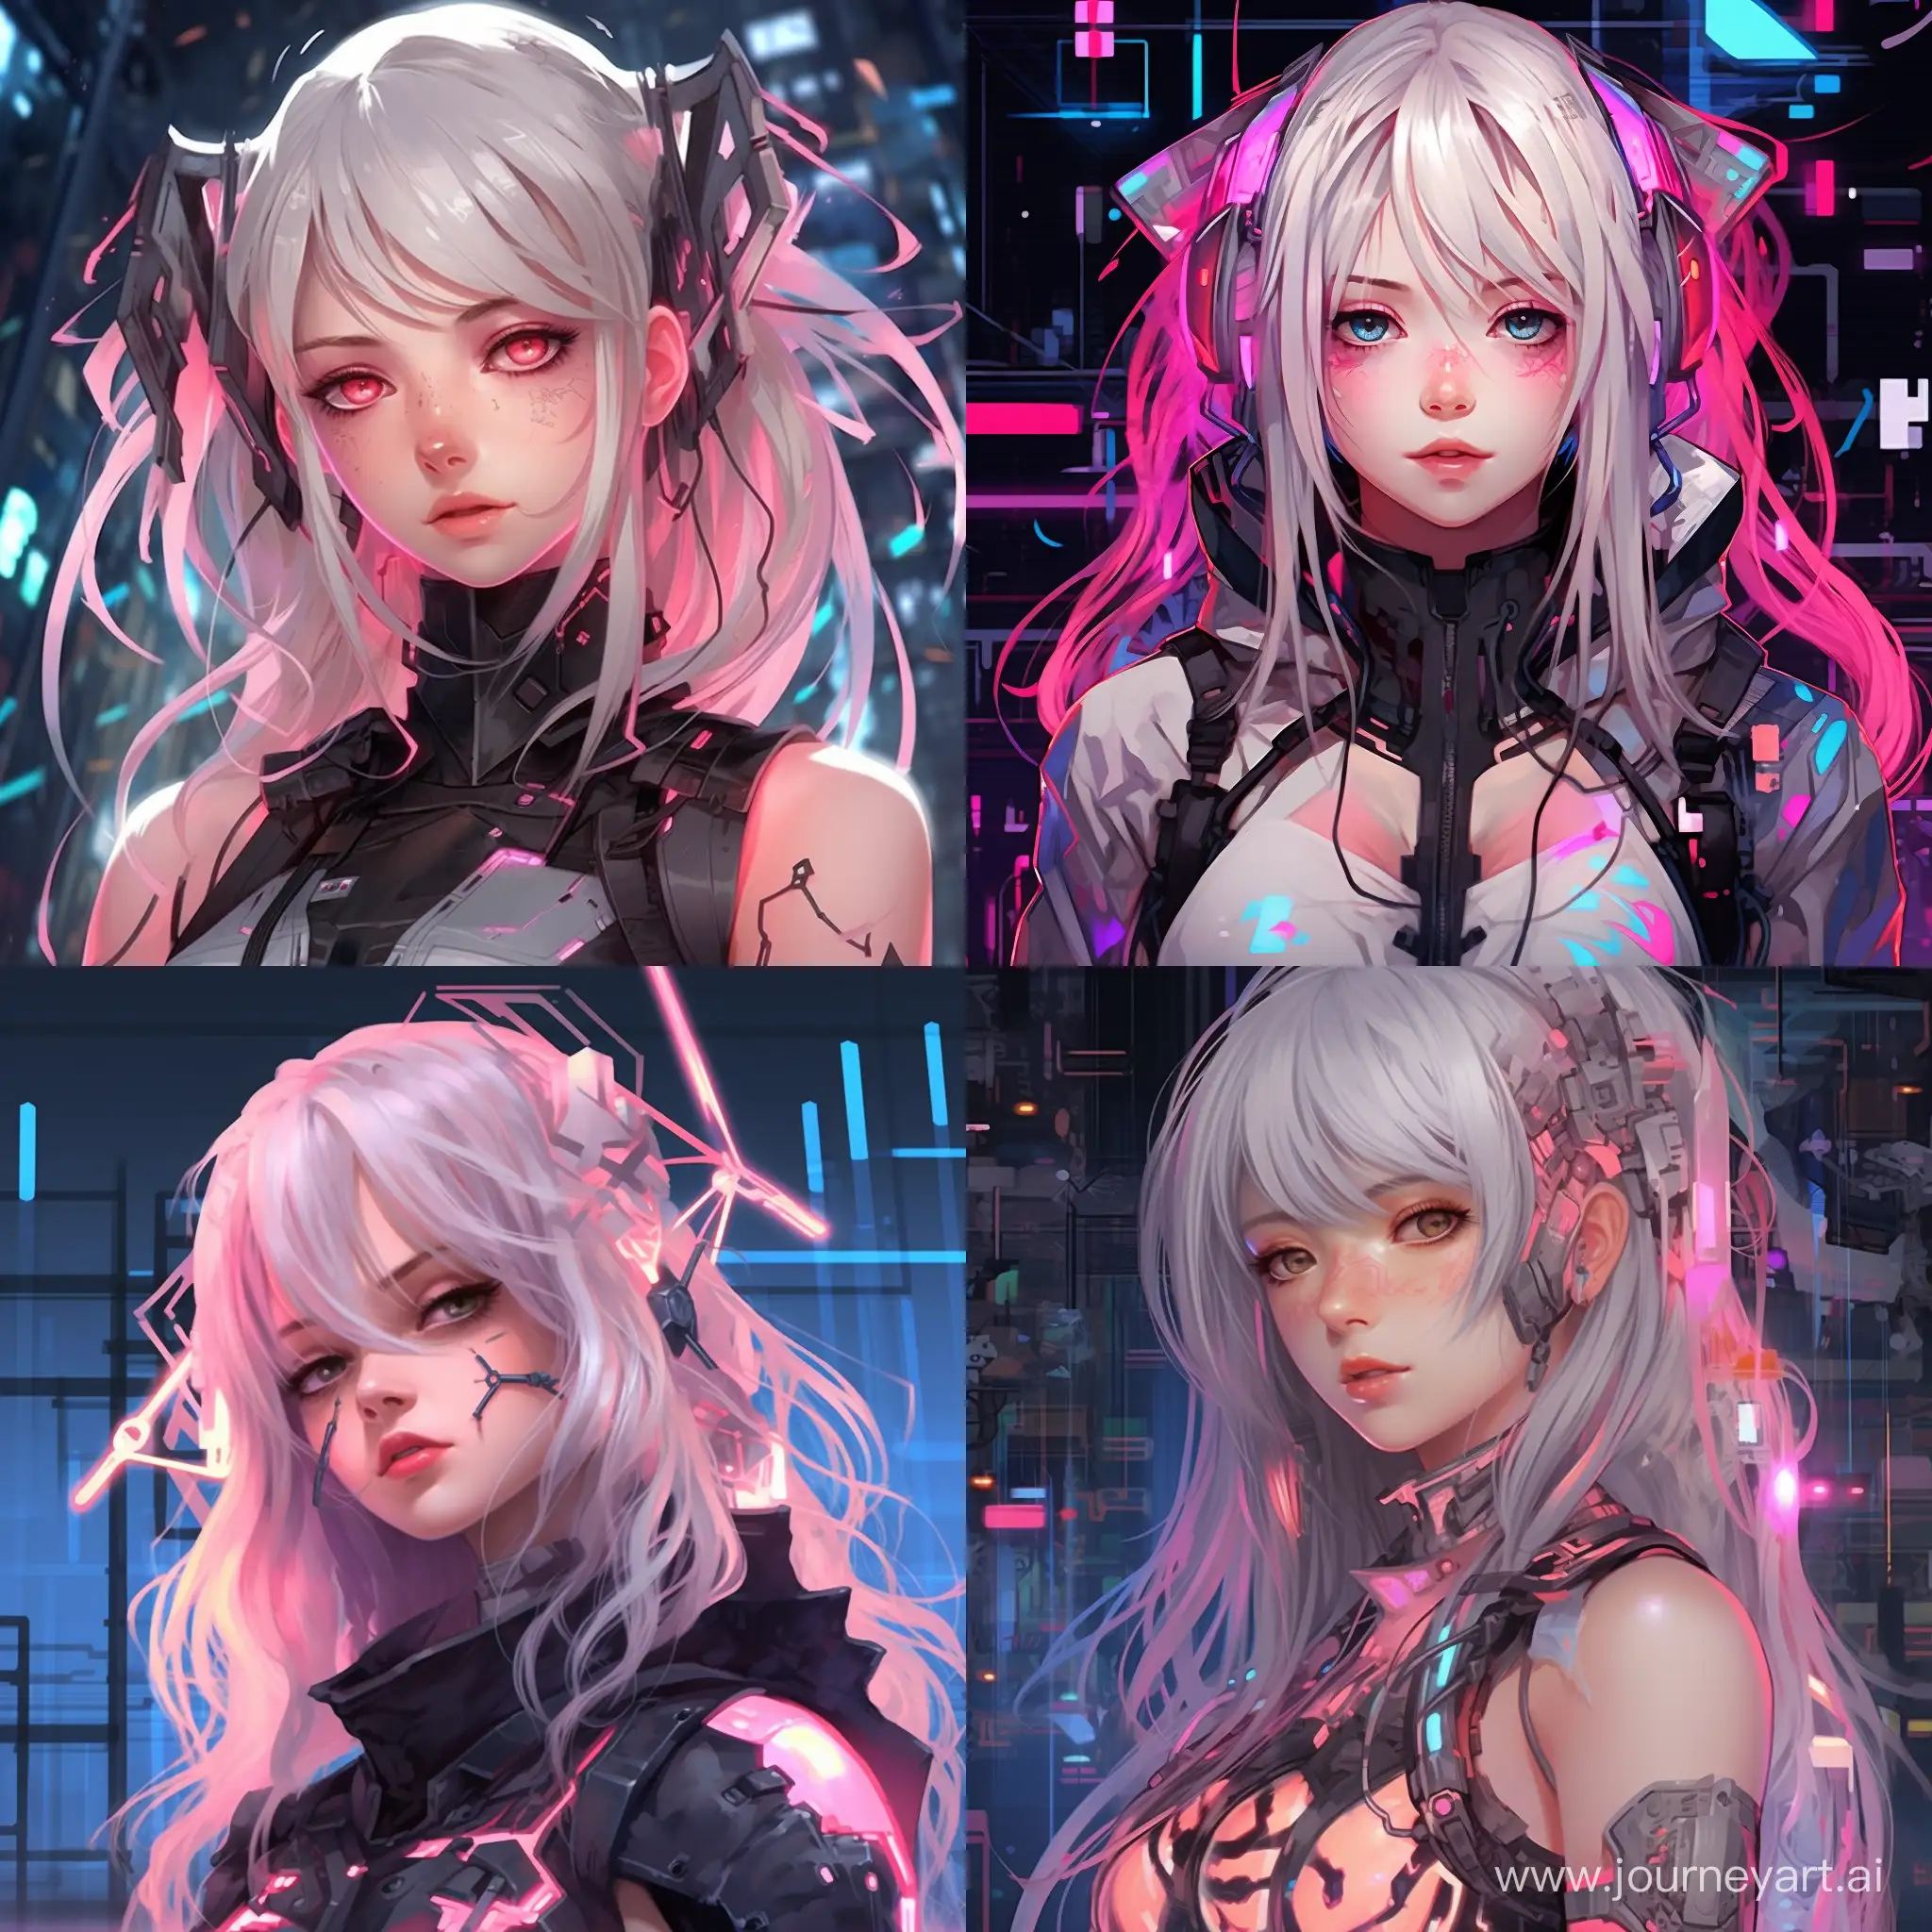 Neon-Glitch-Cutecore-Anime-Art-Enchanting-Girl-with-White-Hair-and-Pink-Eyes